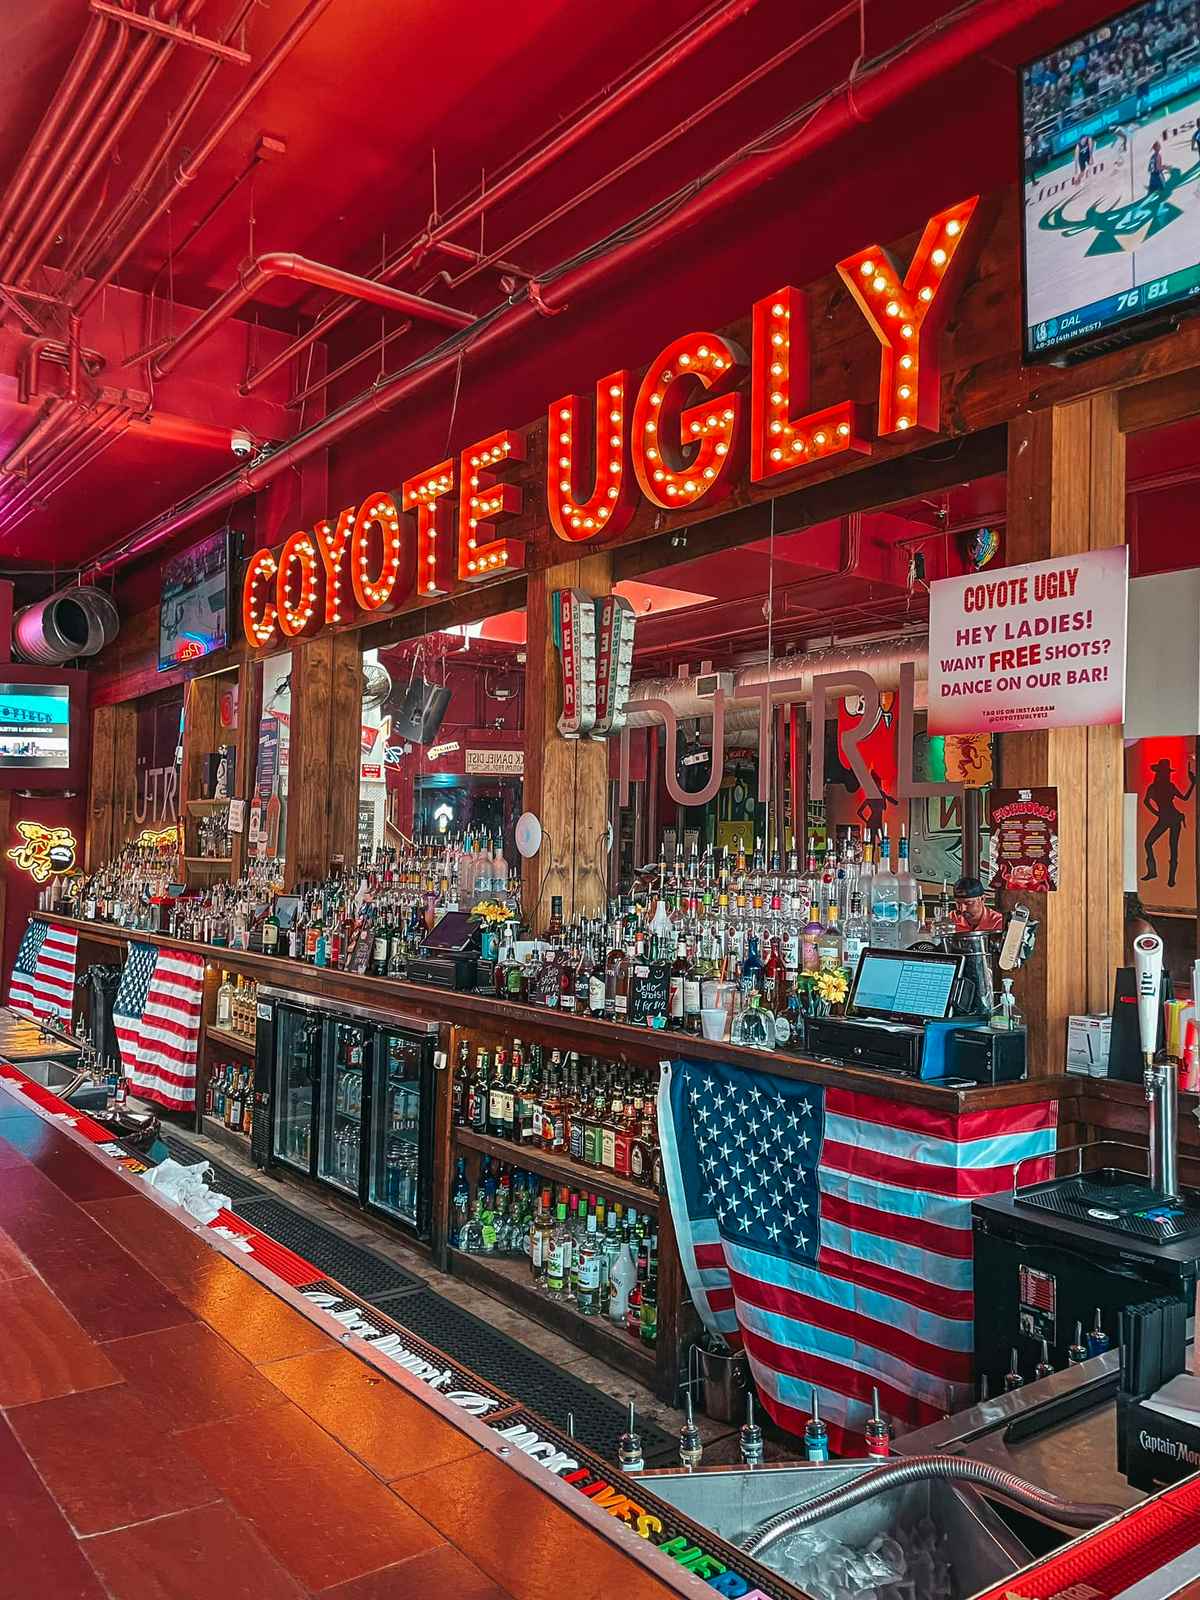 Coyote Ugly Saloon in Ybor City